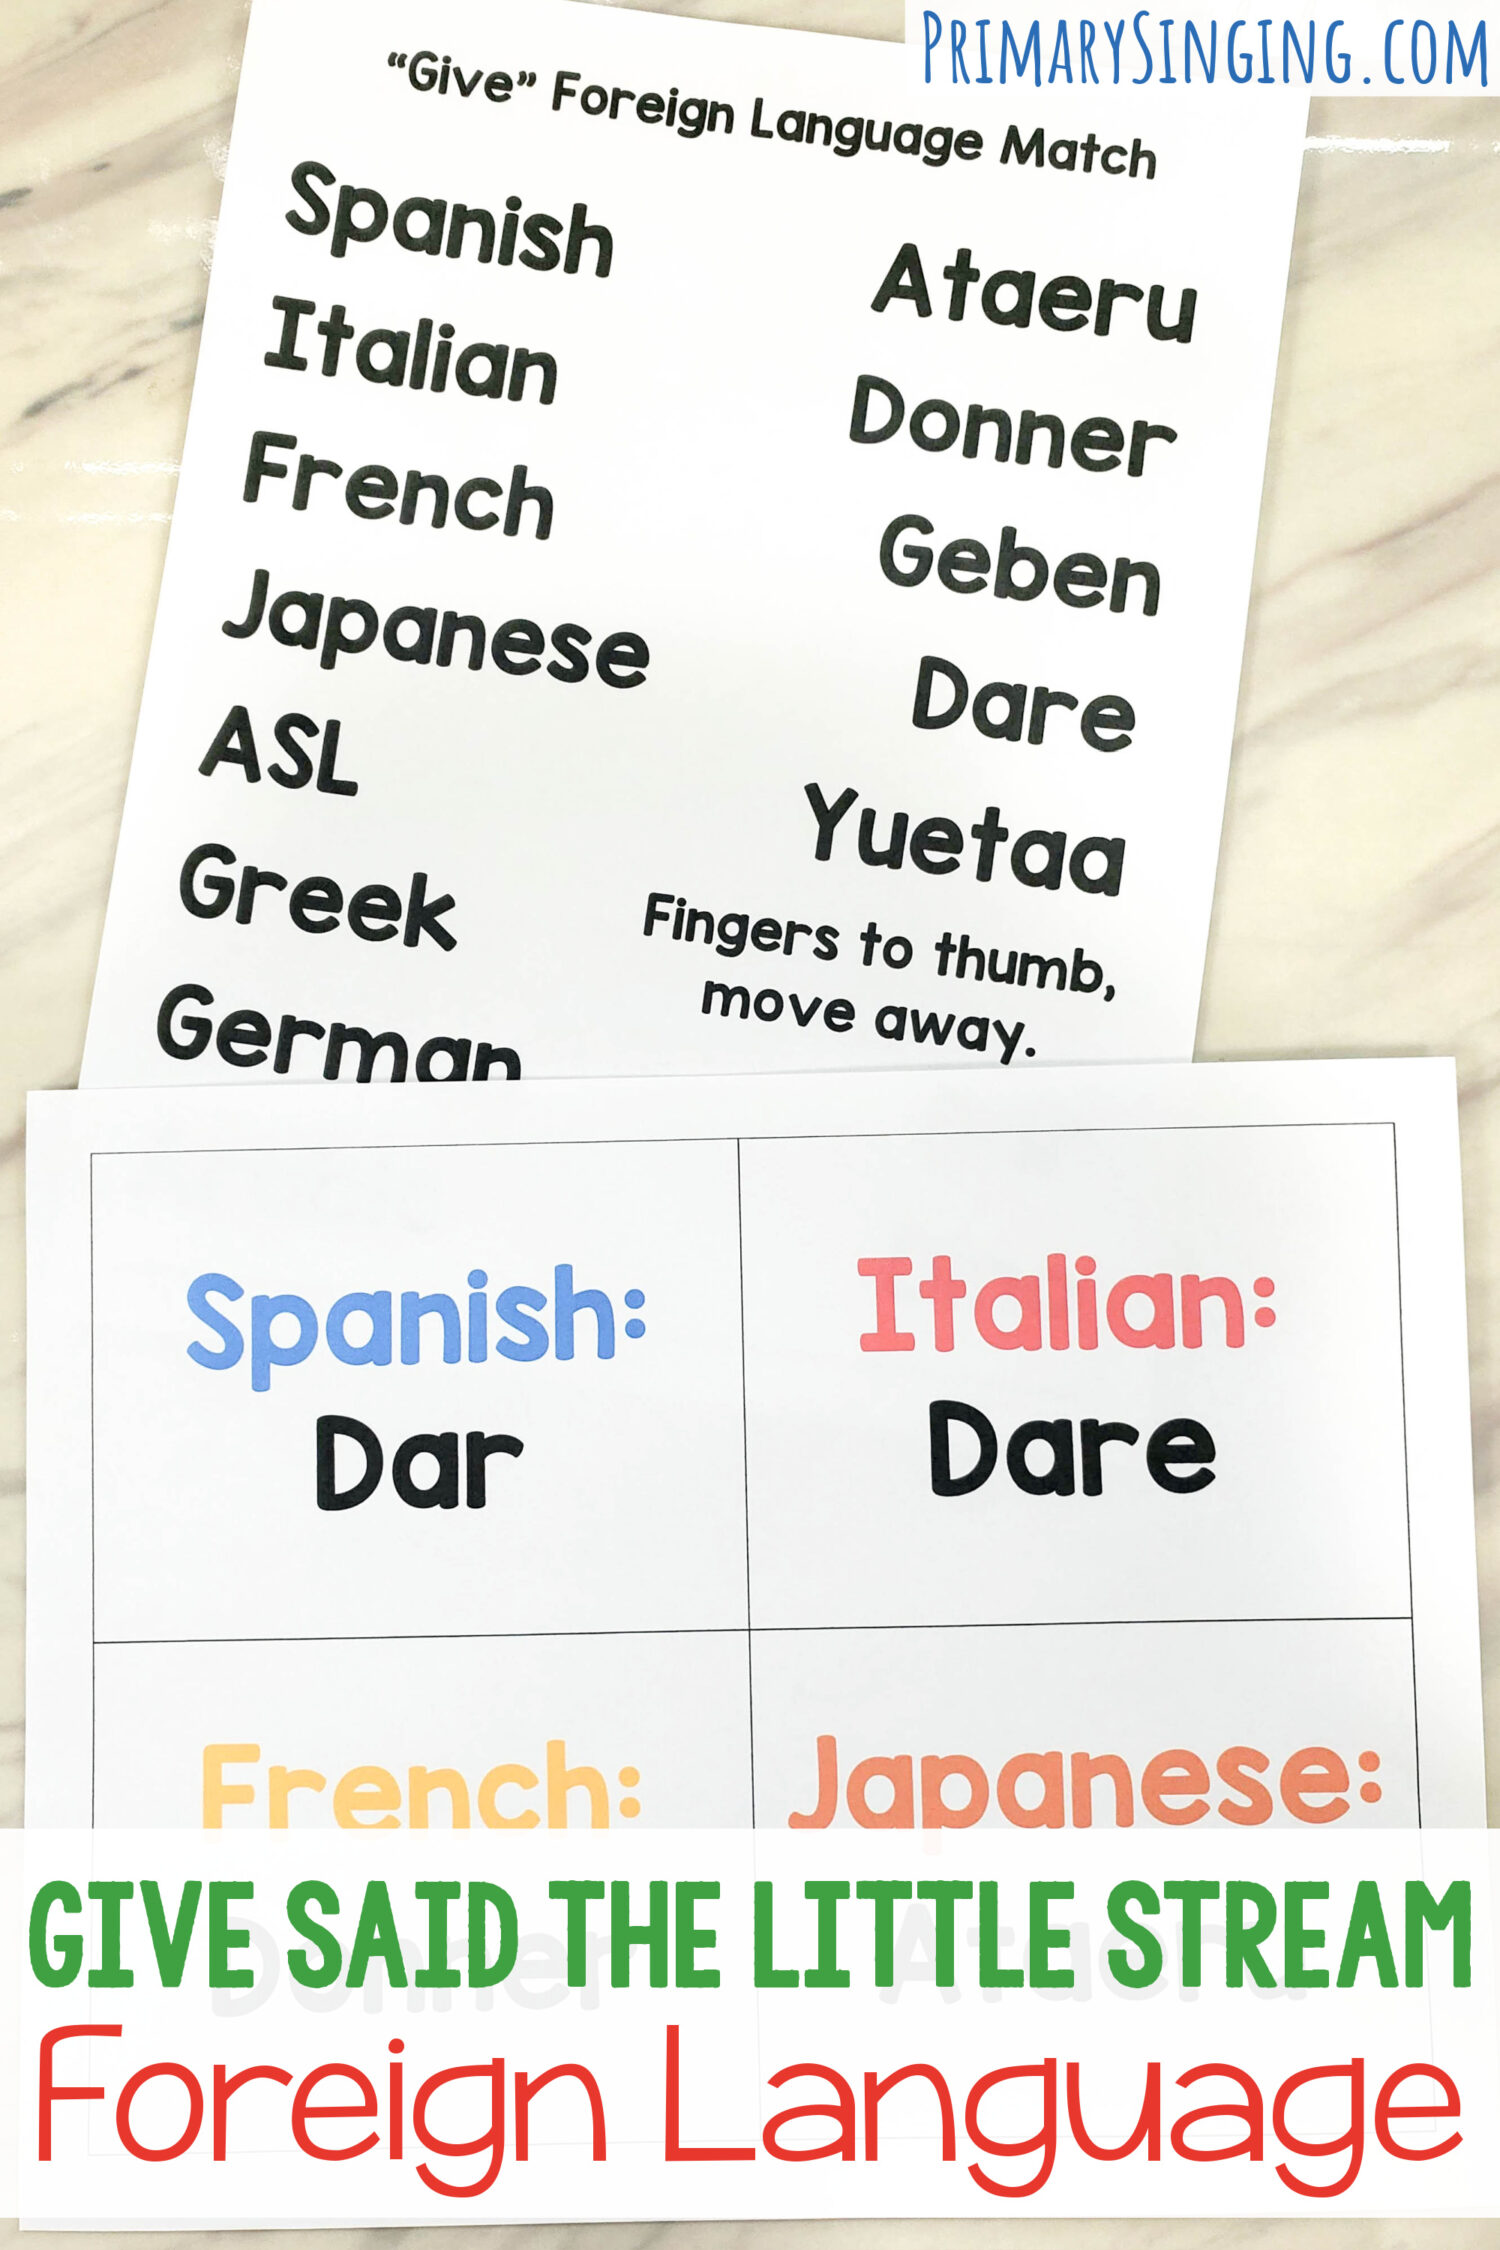 For a fun way to review Give, Said the Little Stream this month, see how many different ways you can say "Give!" This Give Said the Little Stream - Foreign Language singing time activity is a great word game to get in some repetition in a fun and simple way!